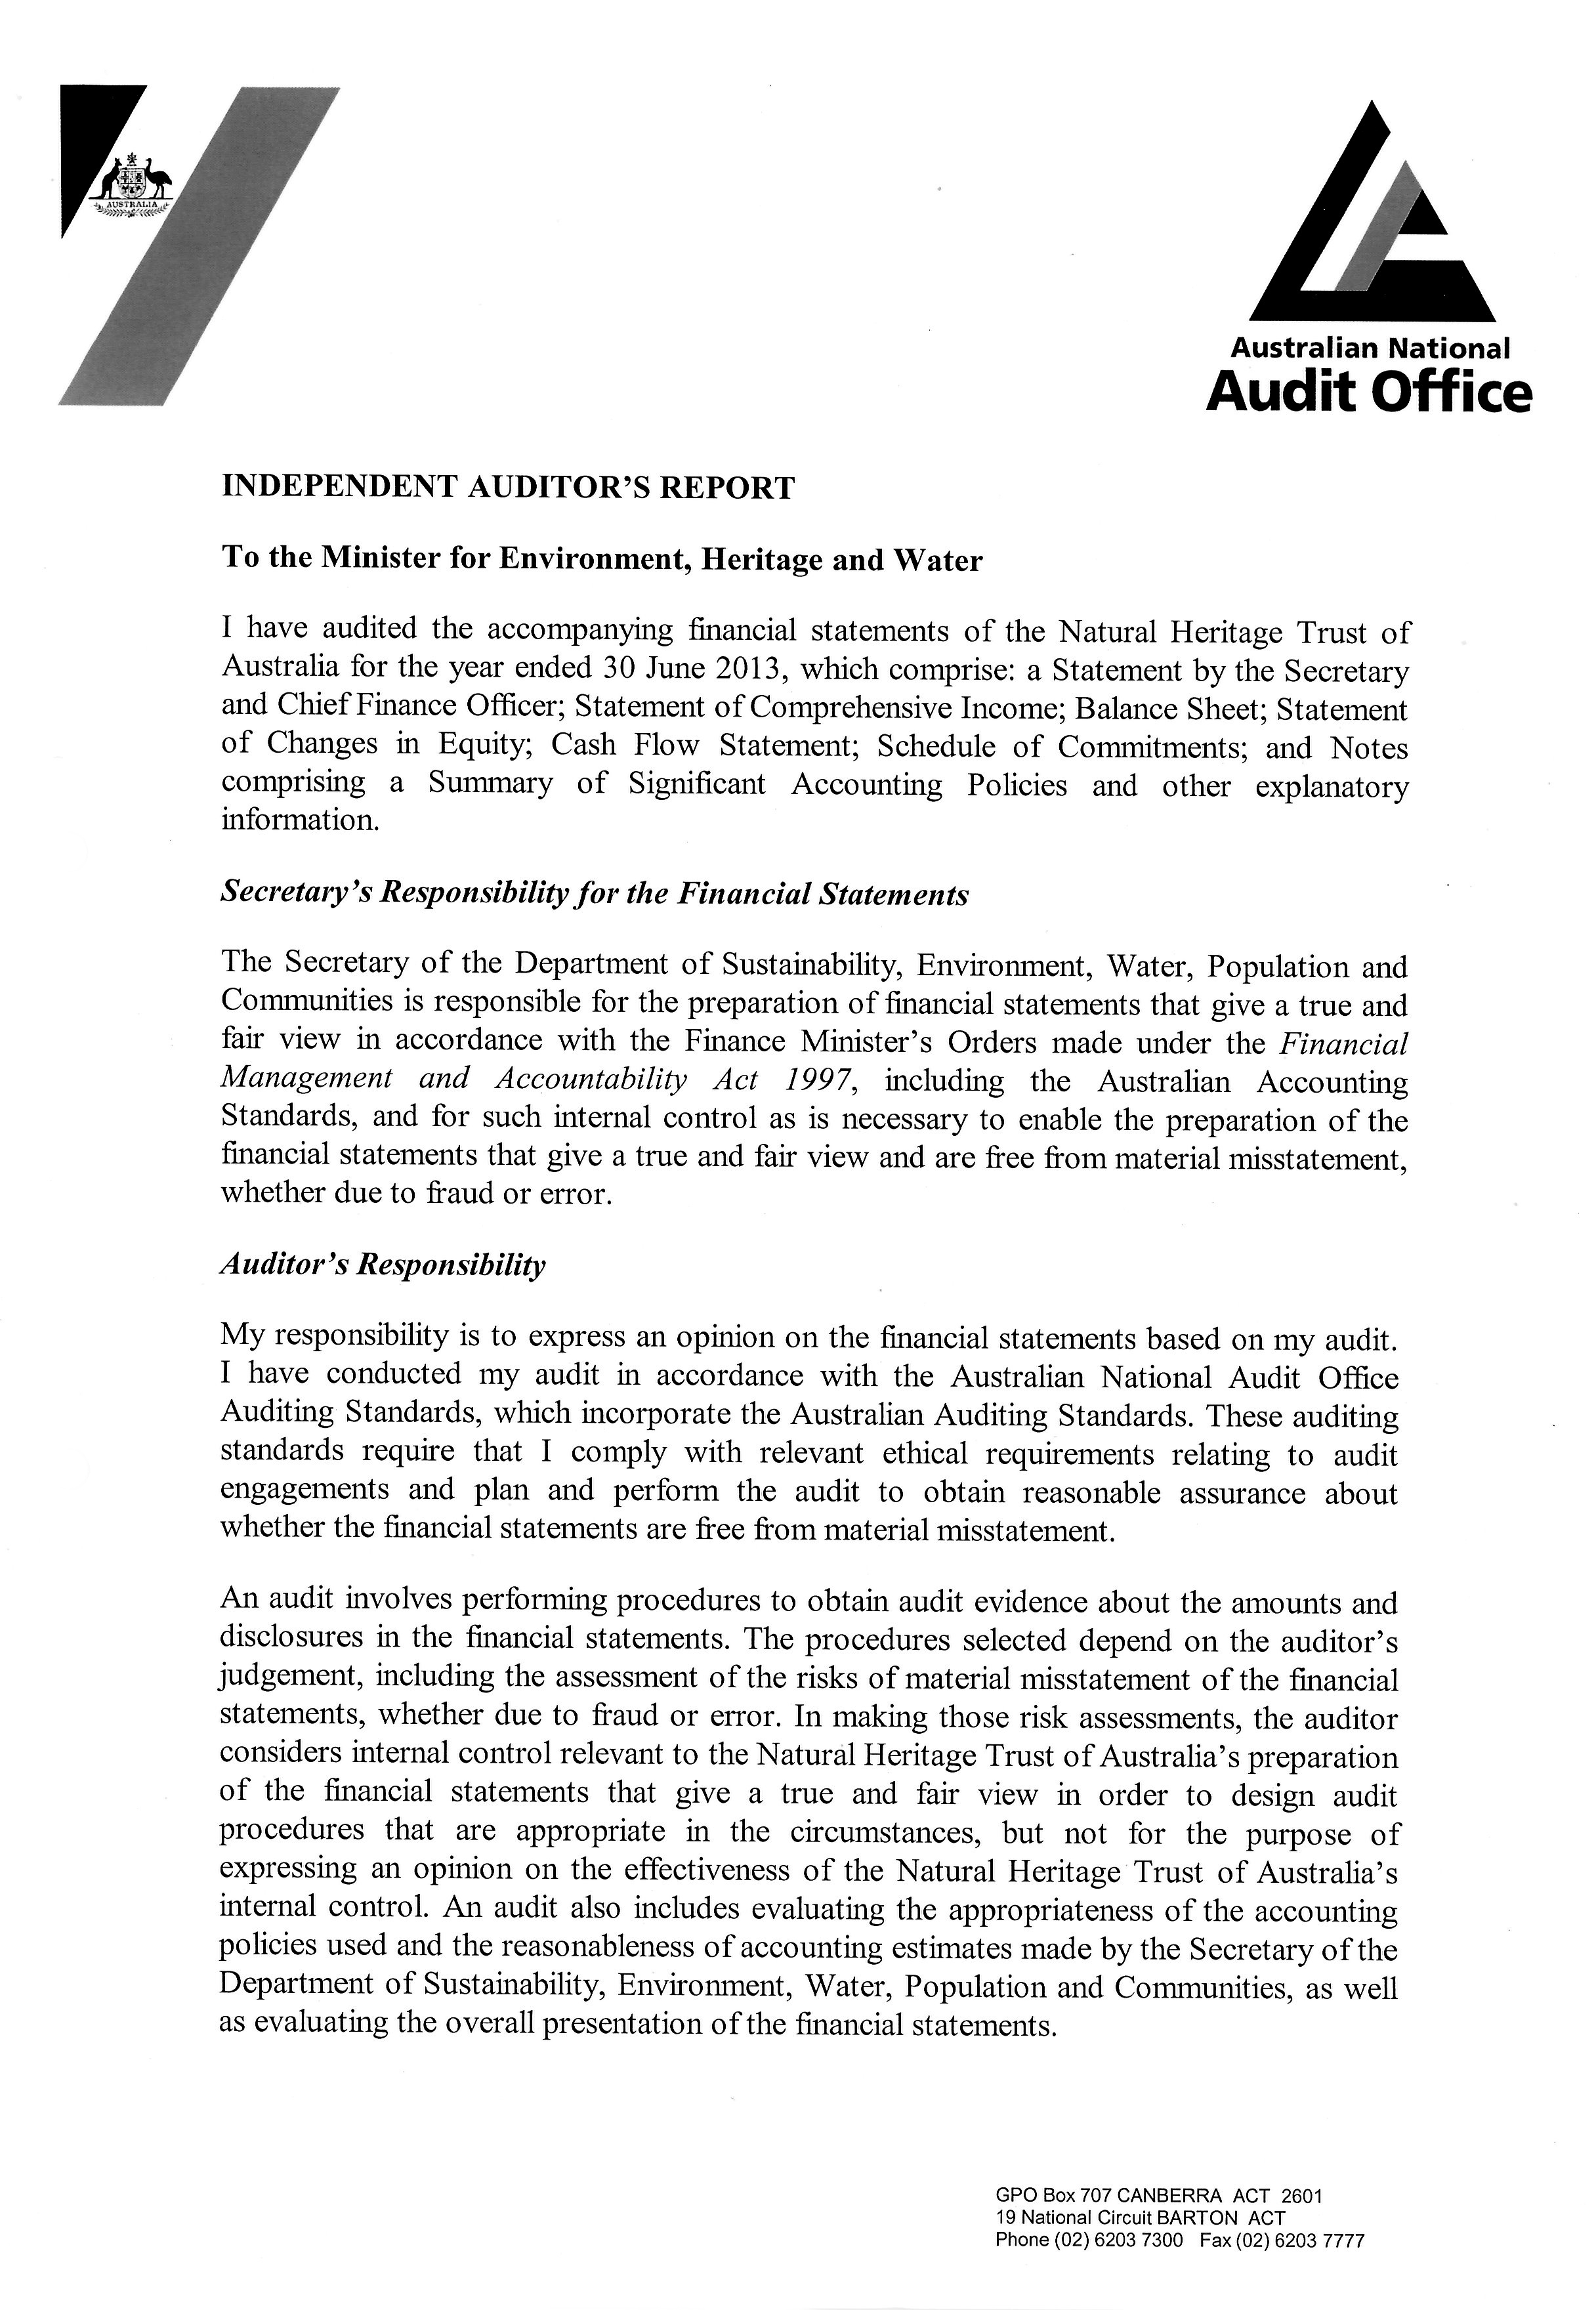 independent auditor’s report for the financial statements of the natural heritage trust of australia. covering letter to the minister for the environment, heritage and water. signed john jones, executive director, australian national audit office, delegate of the auditor-general, canberra, 31 august 2013 (page 1 of 2).   